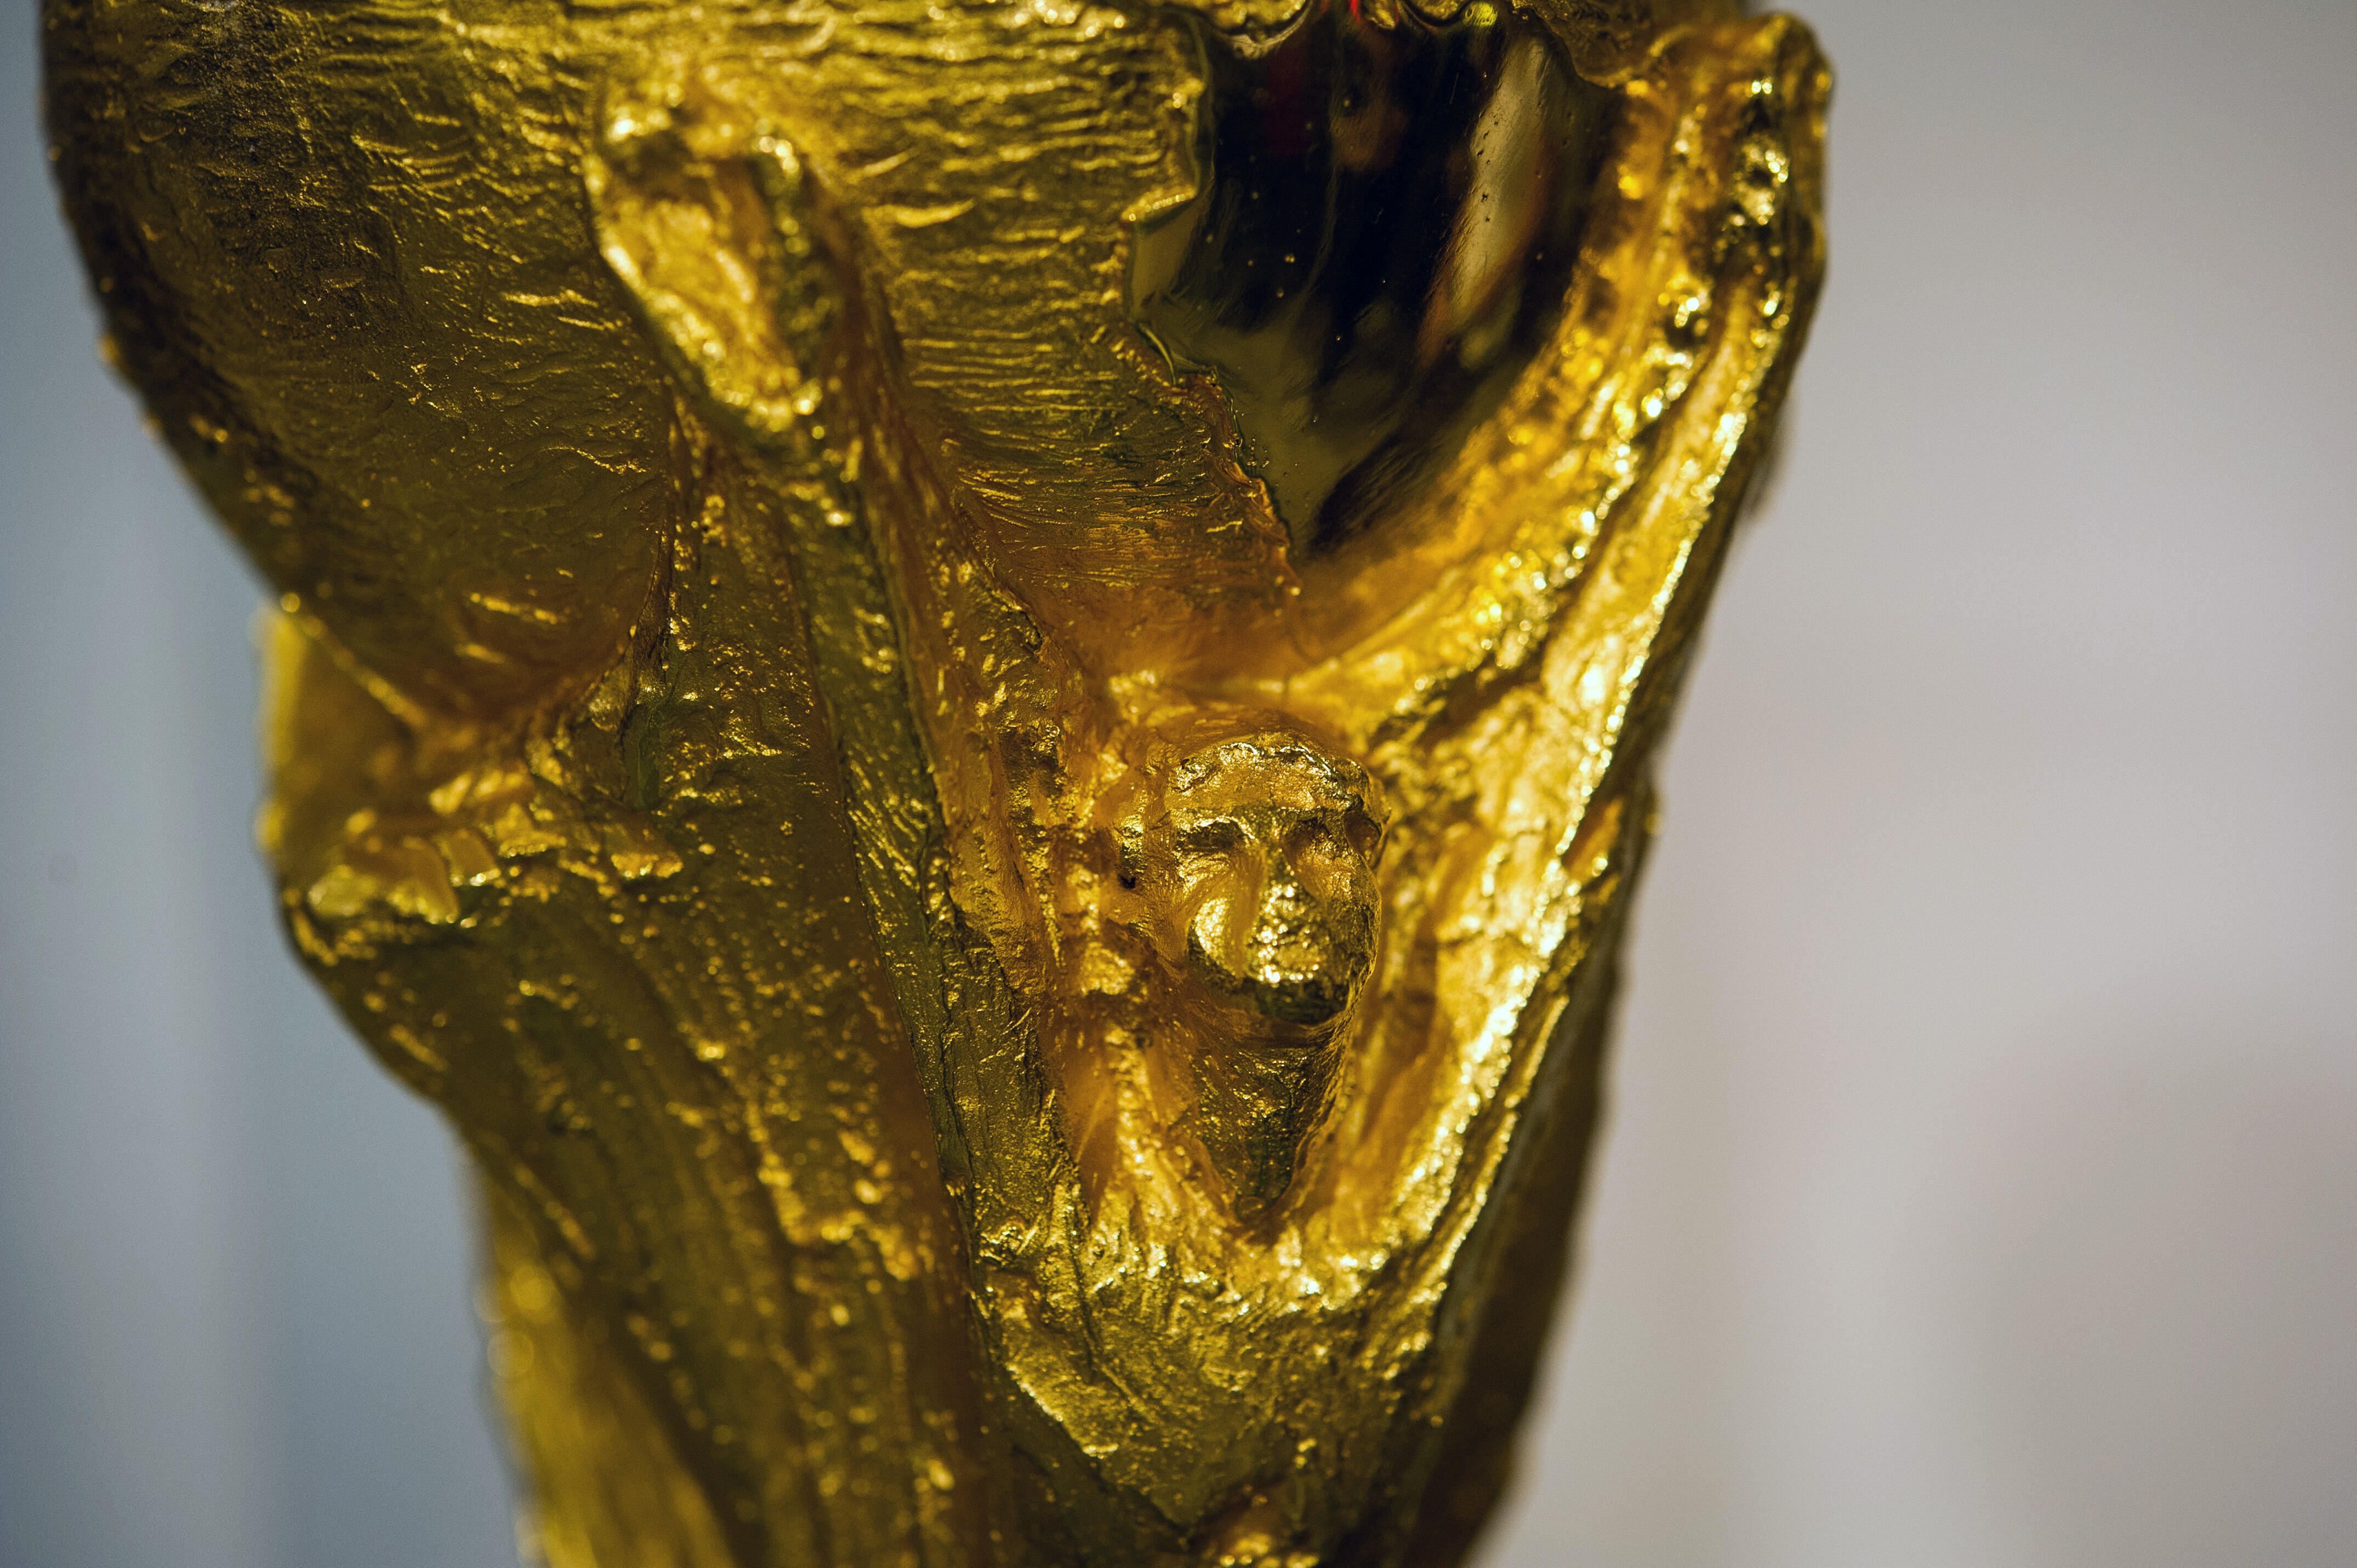 Detail of the trophy of the FIFA World Cup 2014, brought to Brazil by former Brazilian football player Cafu from the FIFA headqueaters in Switzerland, as it is displayed at Morumbi shopping center in Sao Paulo, Brazil, on September 22, 2012. AFP PHOTO/Yas